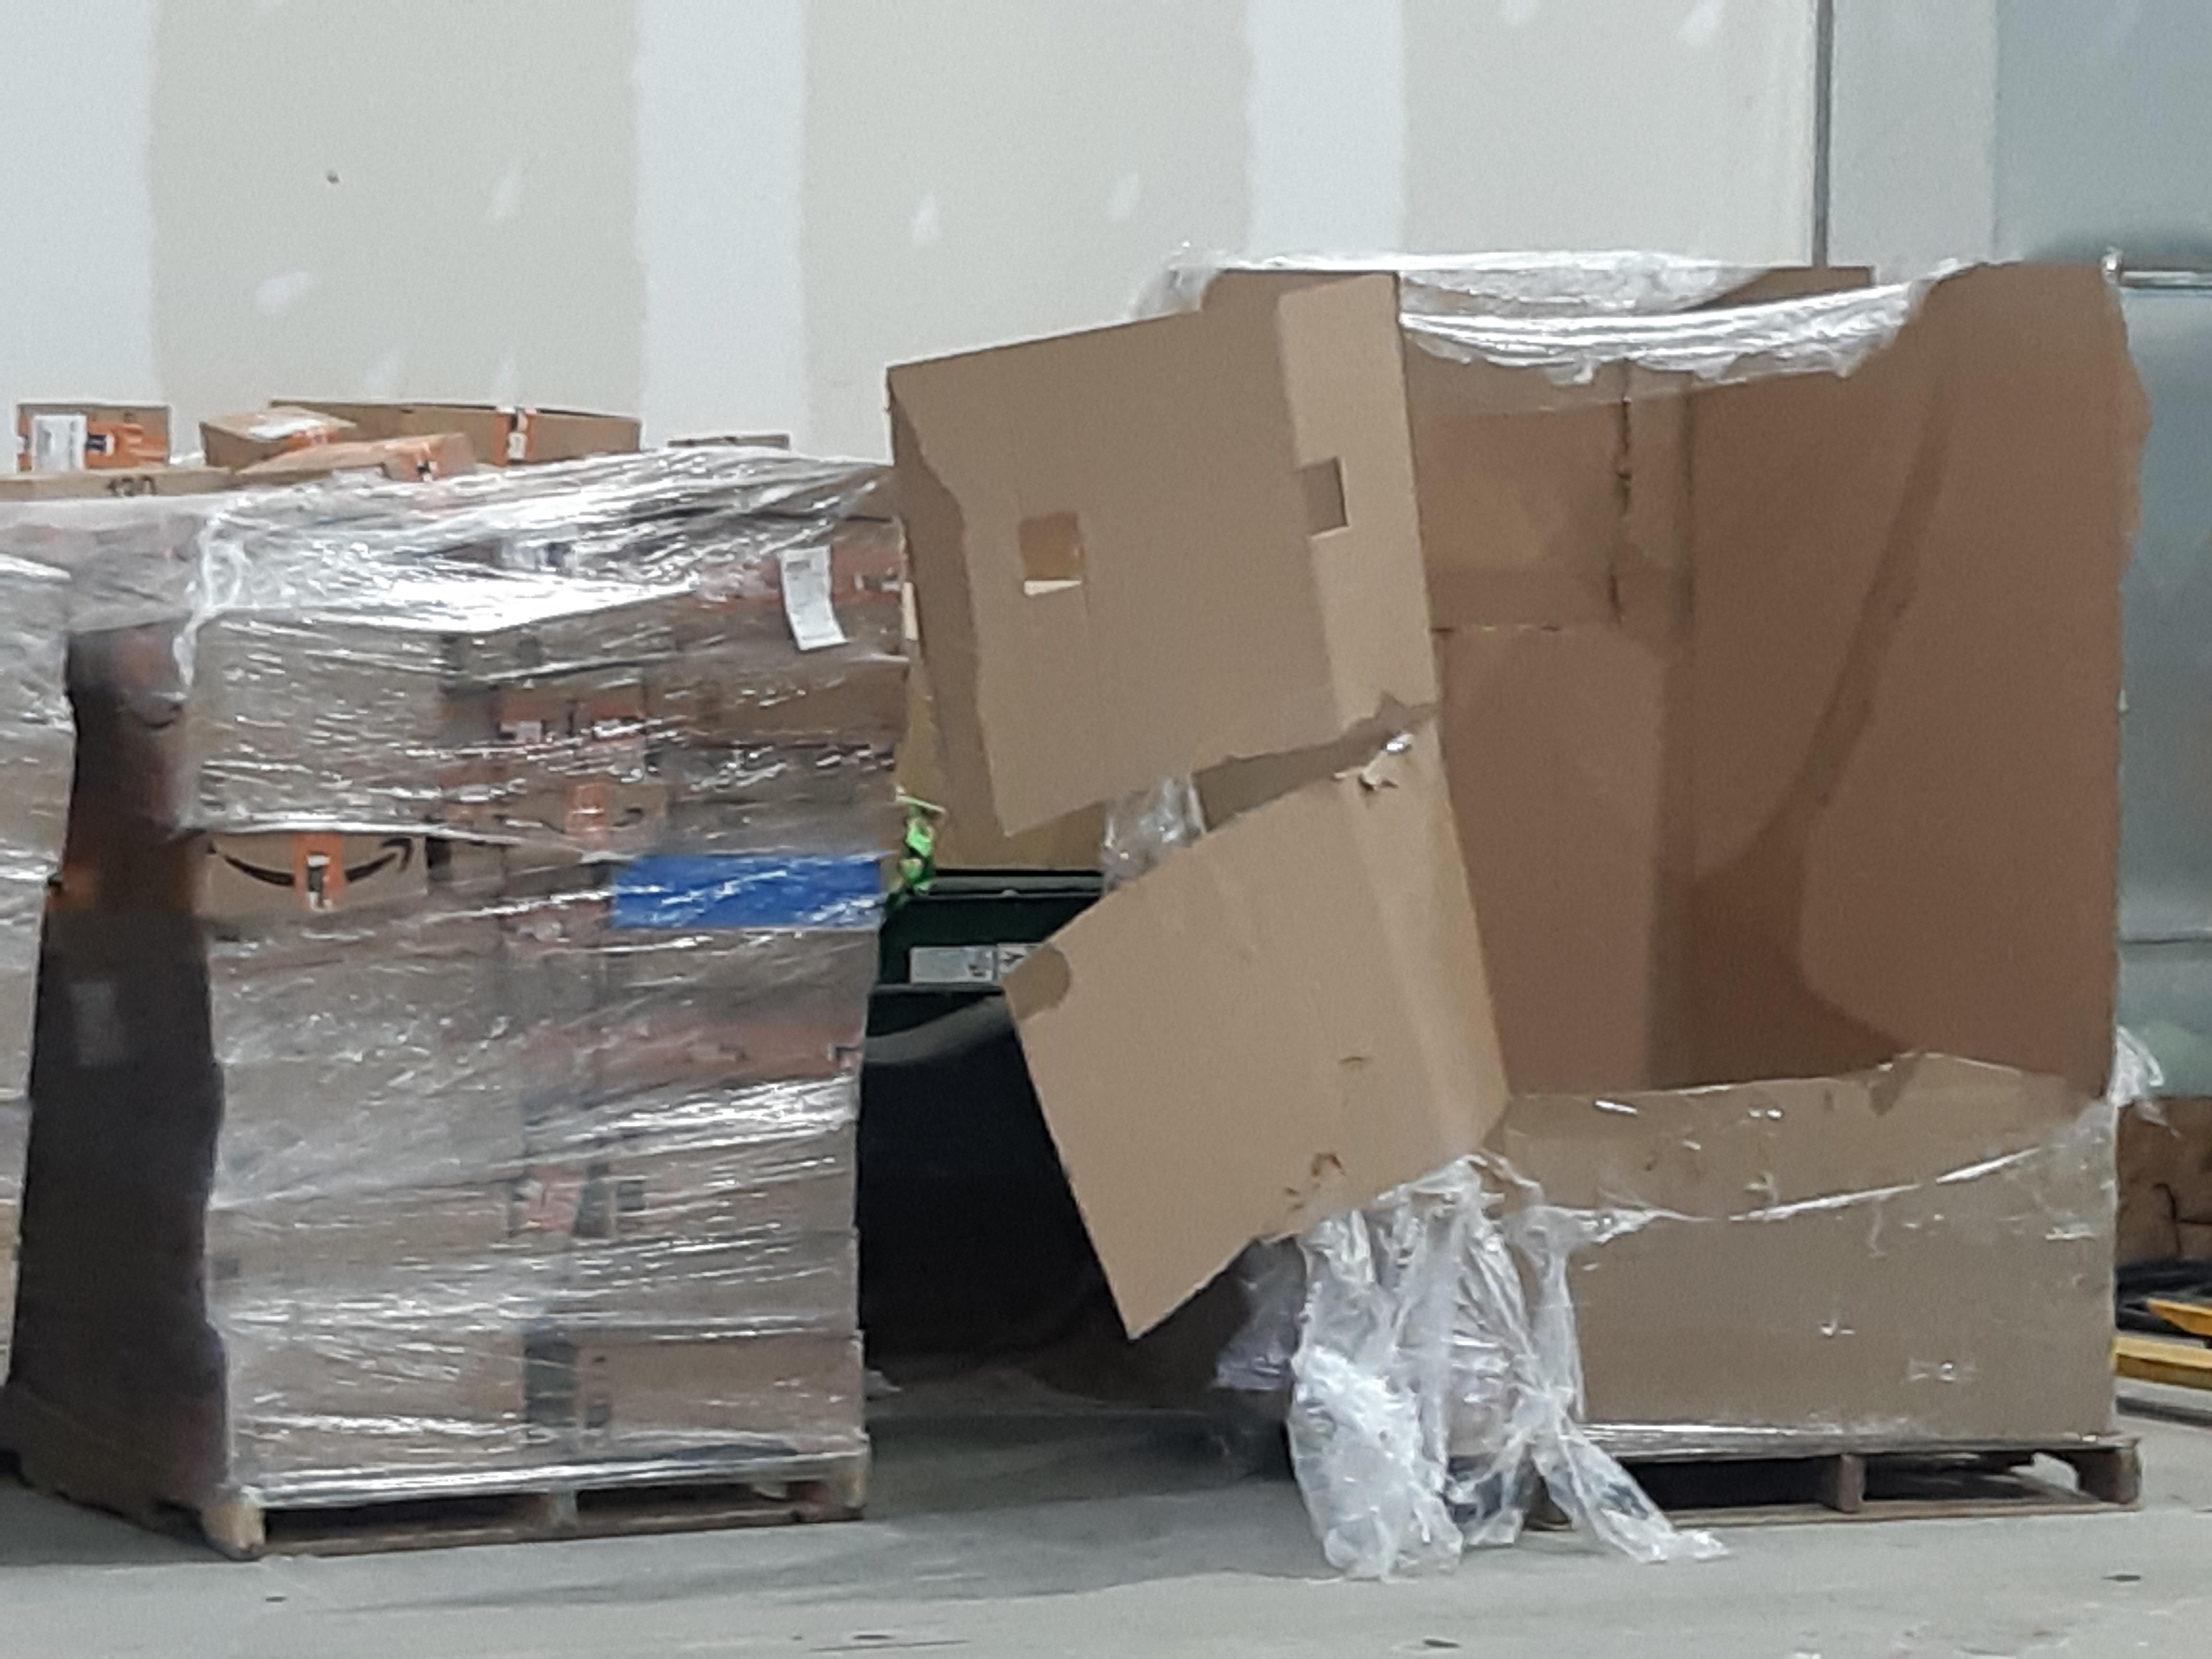 Caught this Canadian looking at me from across the warehouse